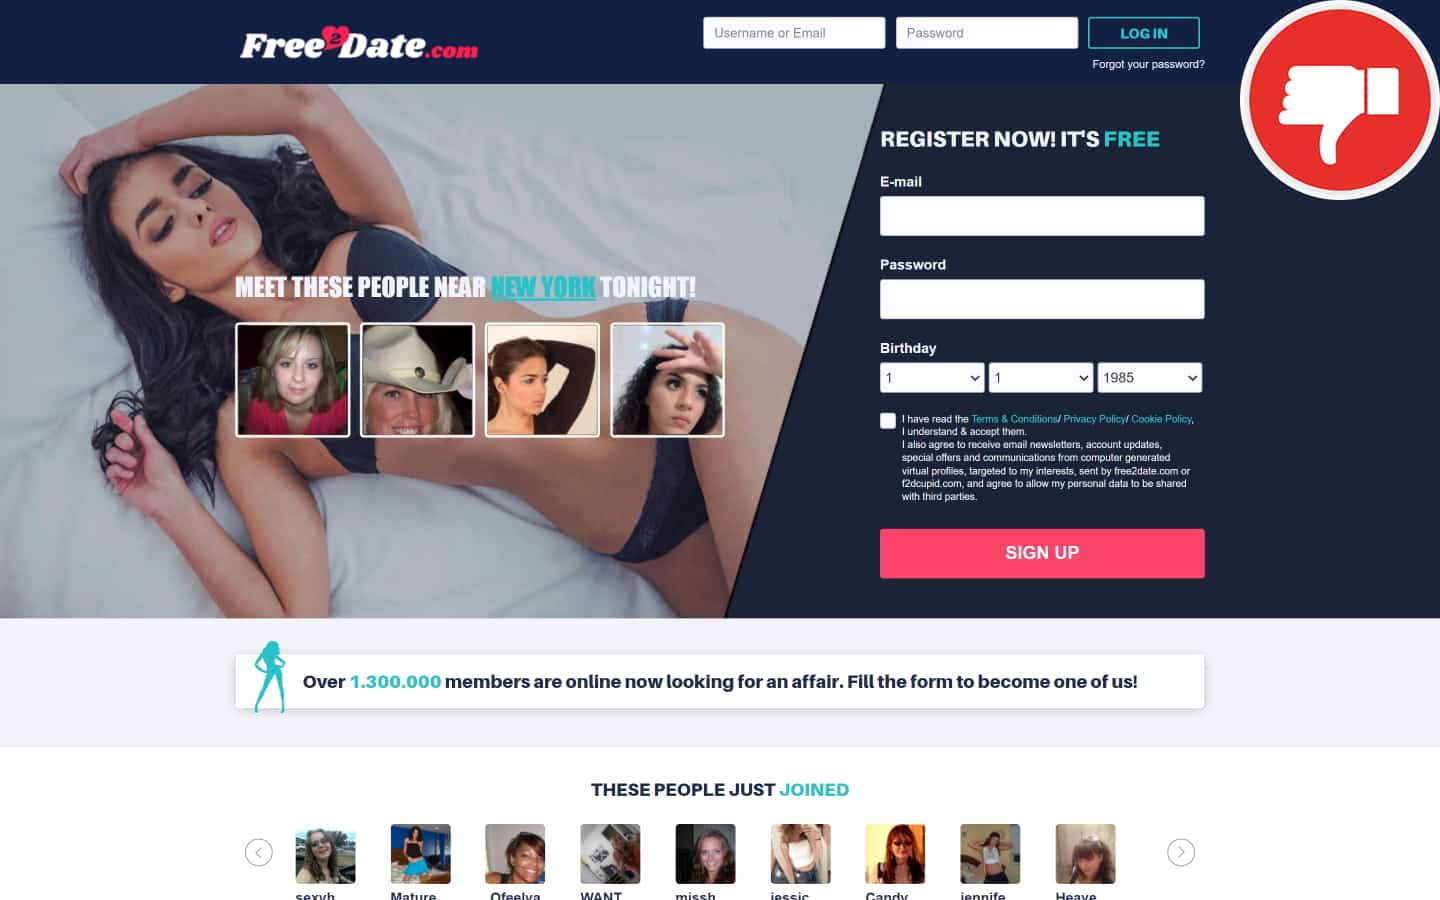 Review Free2Date.com scam experience